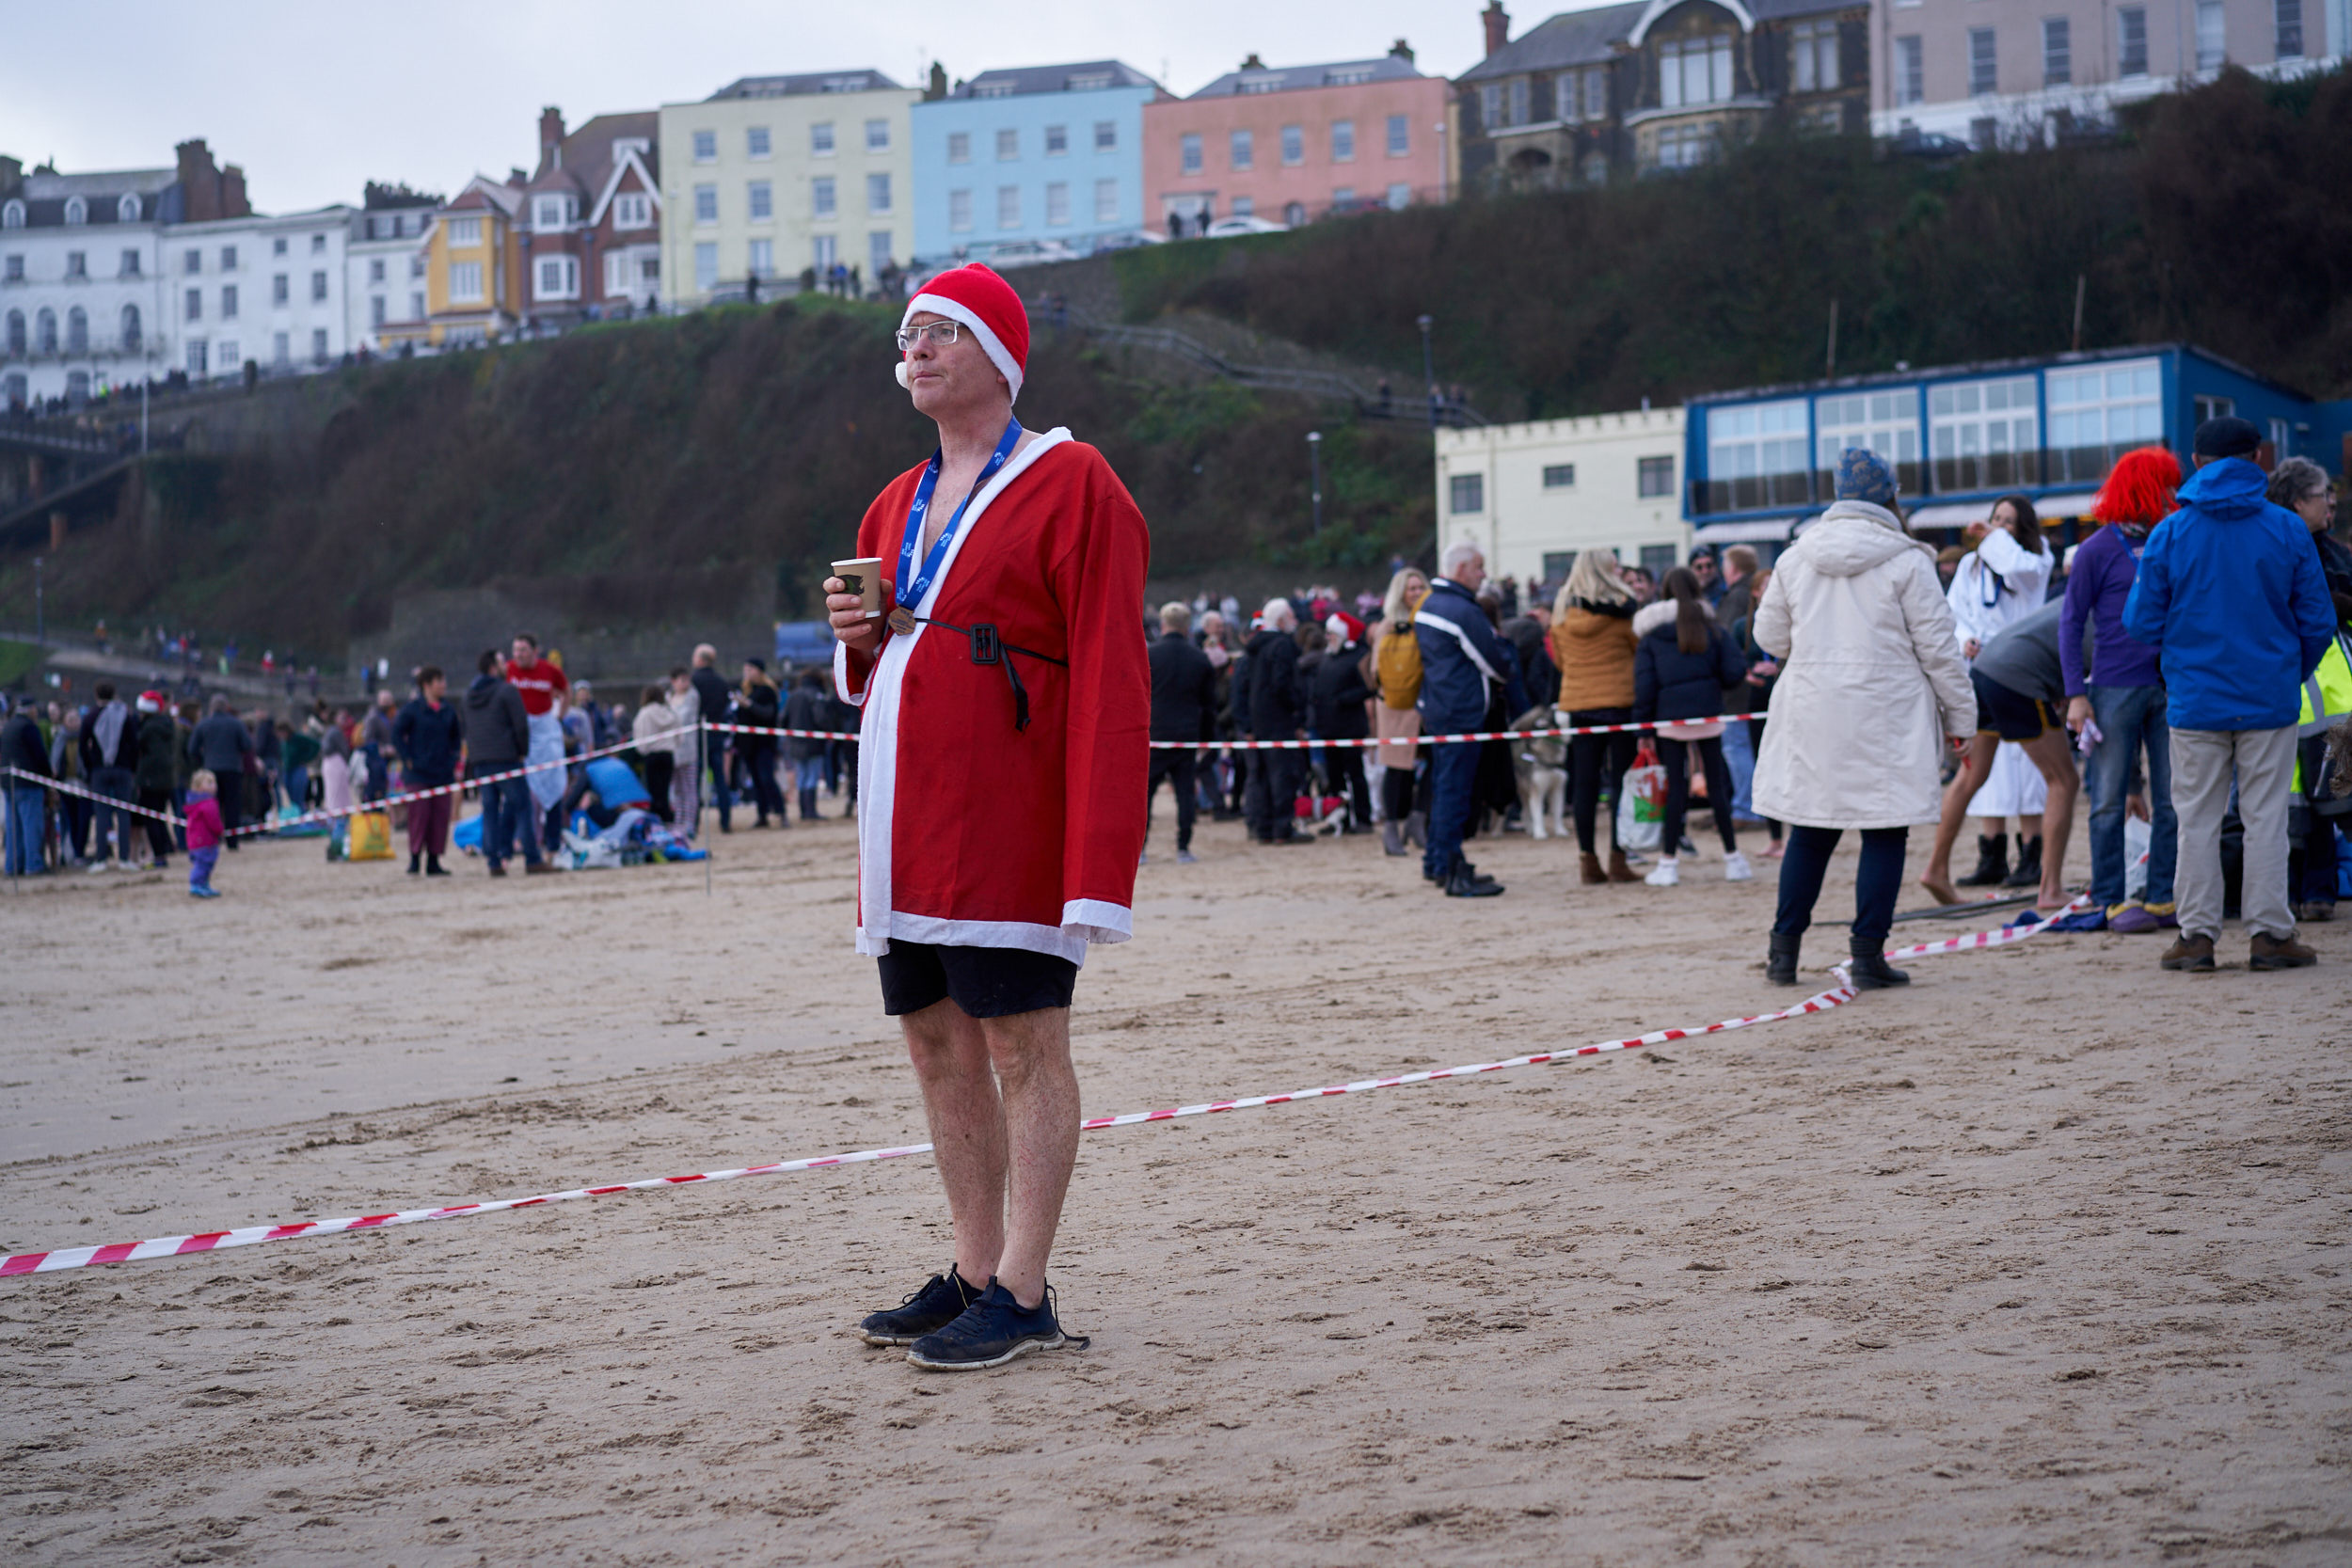 A MAN DRESSED IN A SANTA COSTUME FROM THE TENBY BOXING DAY SWIM